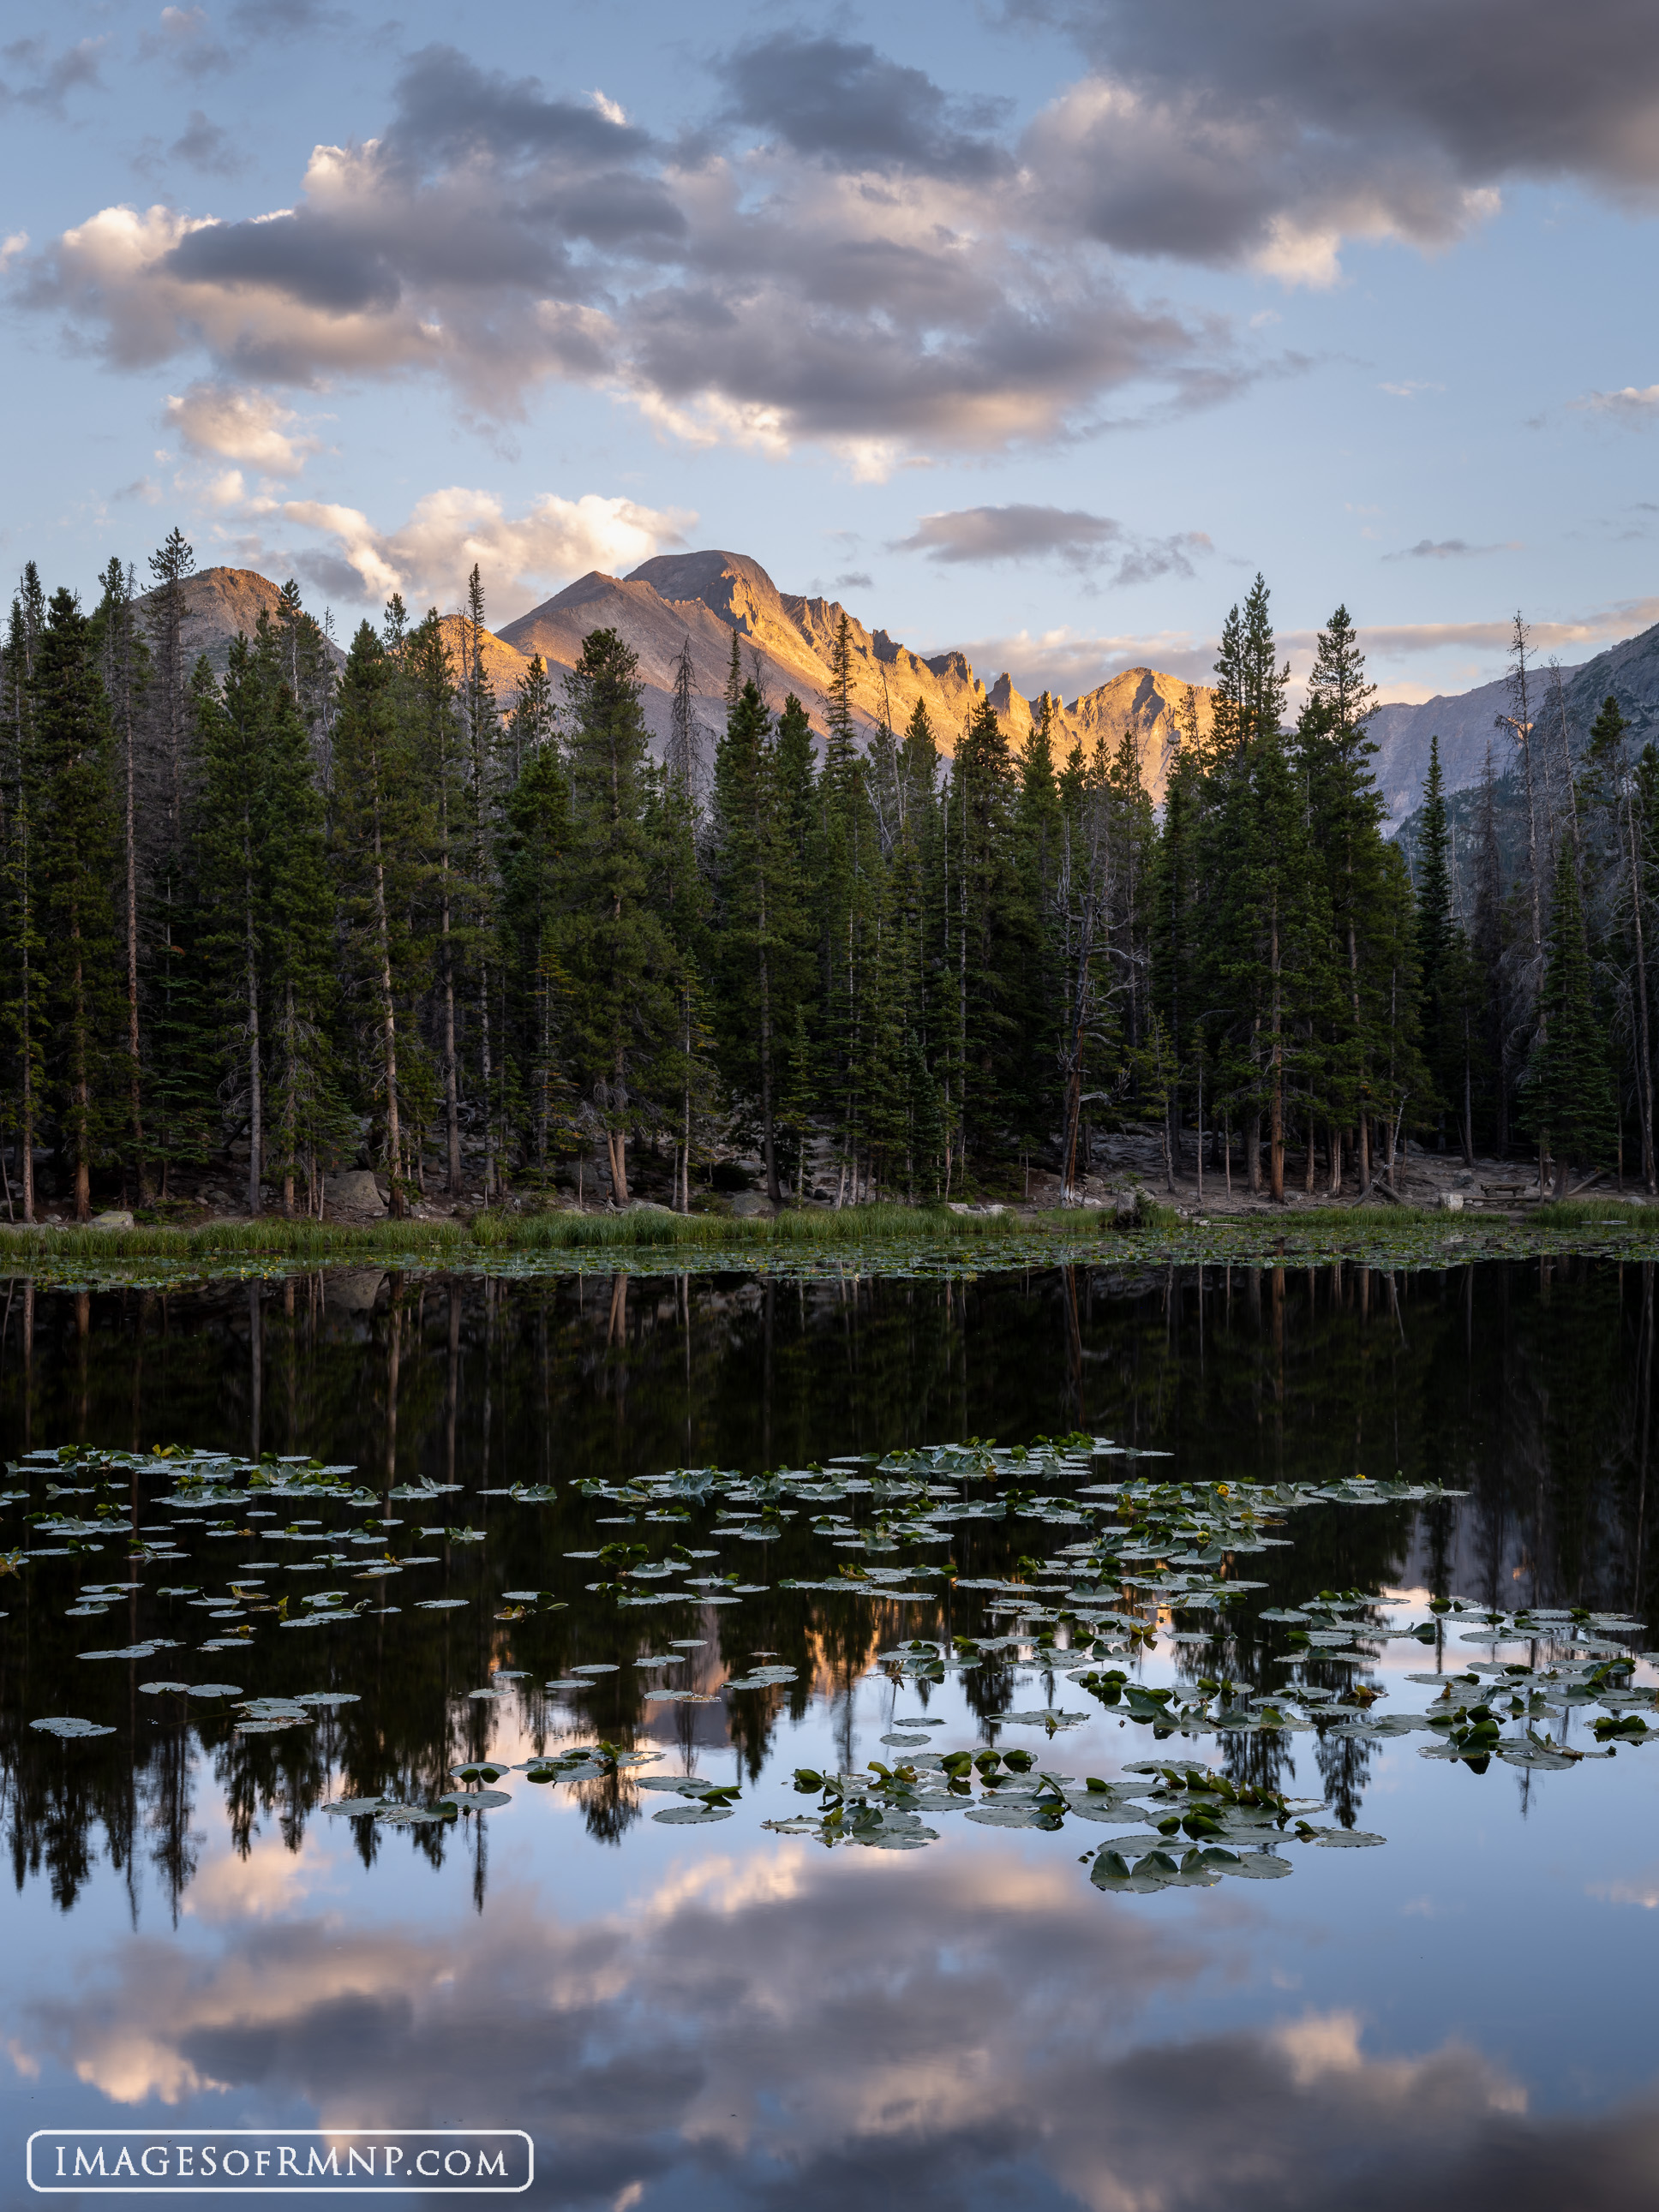 The blocky west face of Longs Peak catches the last light of the day over the calm waters of Nymph Lake.